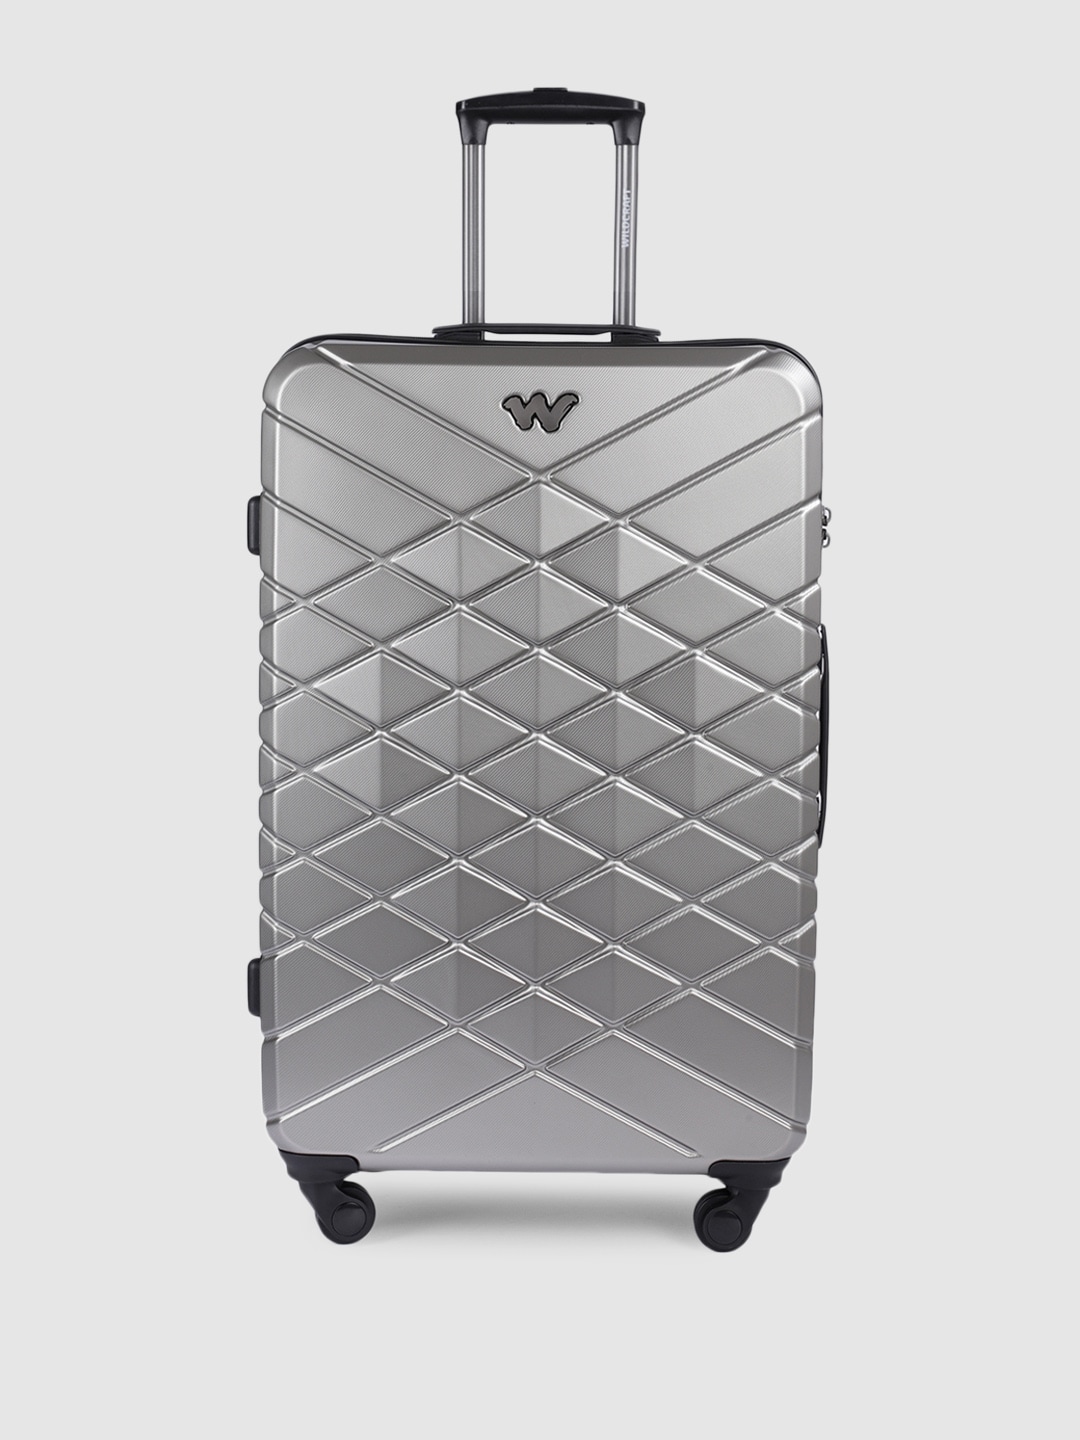 Wildcraft Champagne Textured Saiph Large Trolley Suitcase